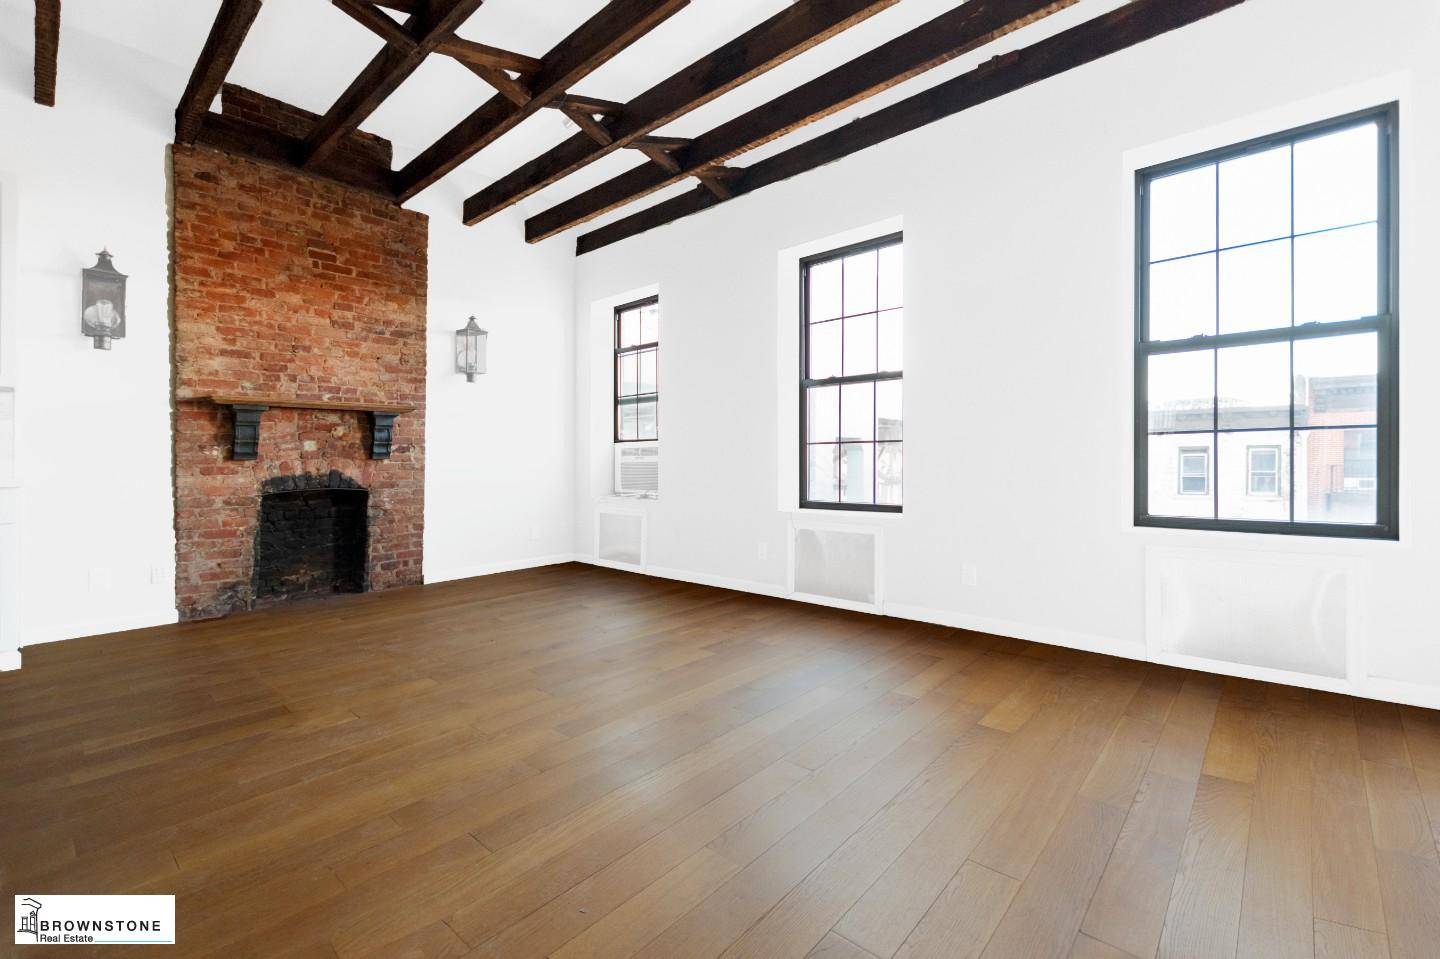 Brand new spacious 1100sf, sun drenched top floor apartment in the heart of trendy Gowanus.